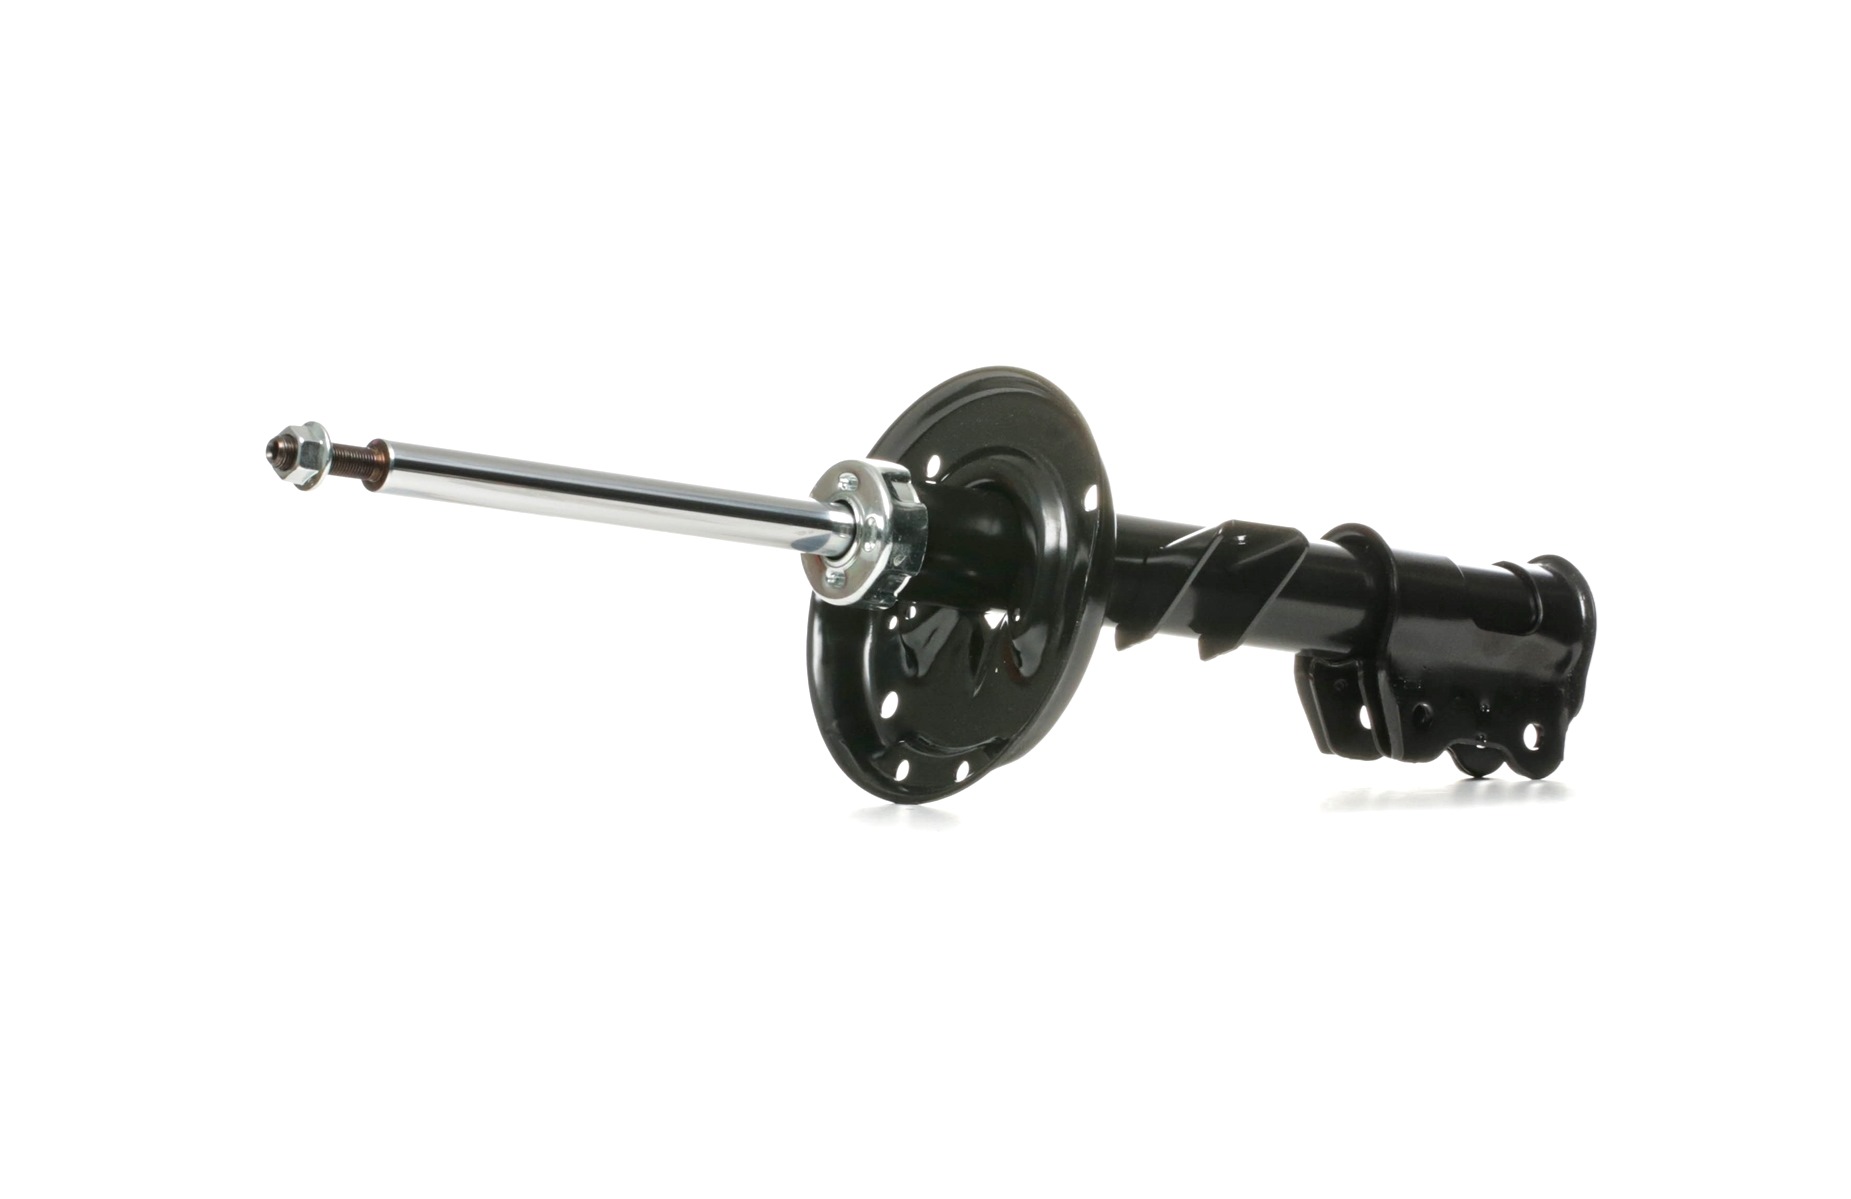 MAGNETI MARELLI 351988070200 Shock absorber Front Axle Left, Gas Pressure, Twin-Tube, Suspension Strut, Top pin